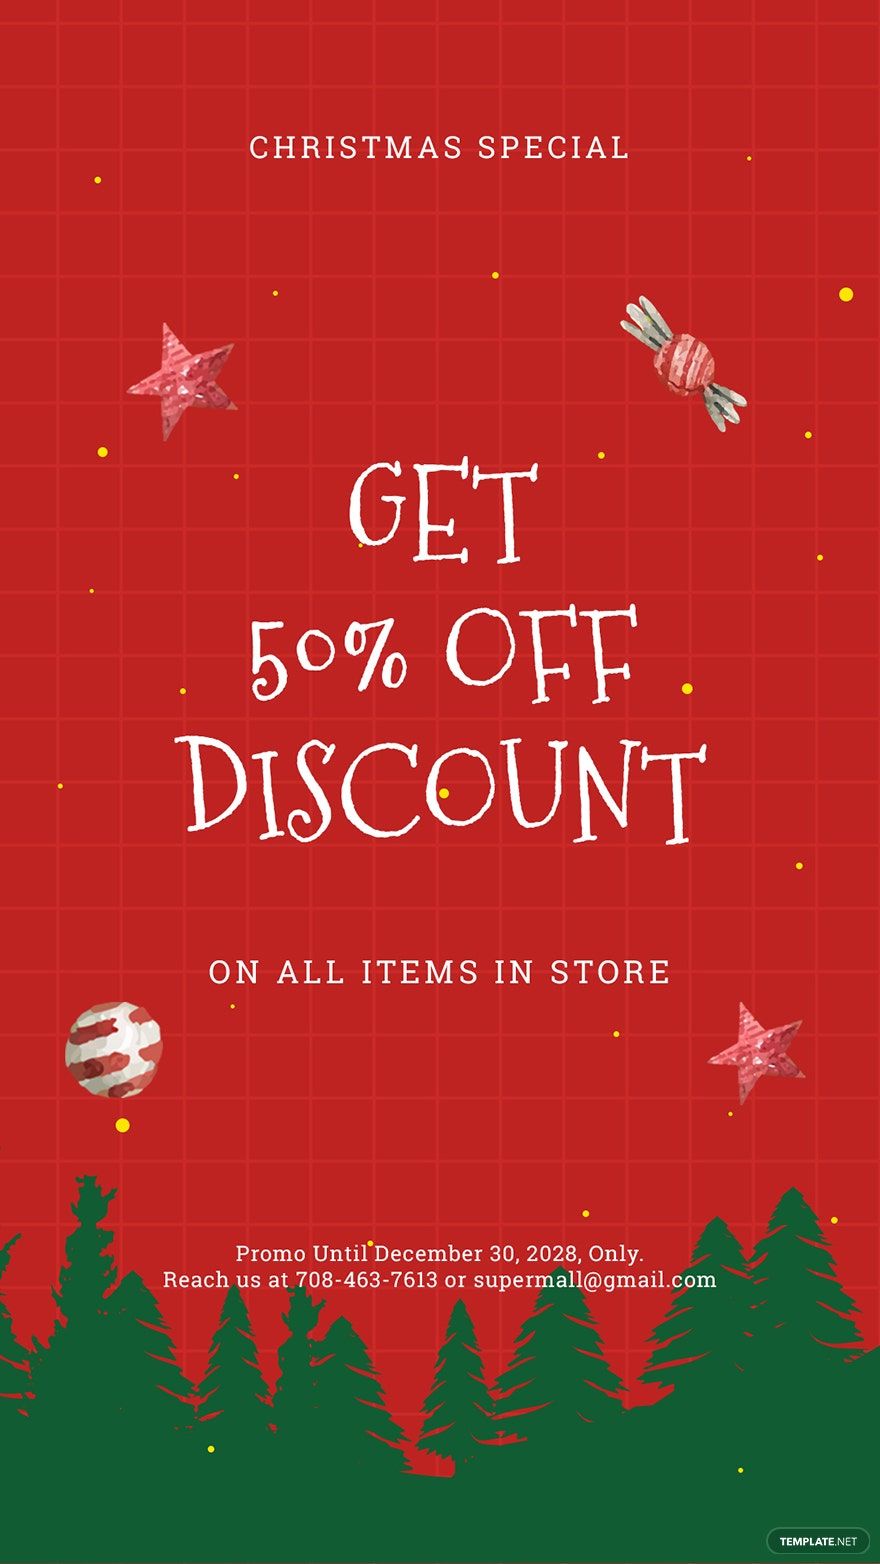 Holiday Off Discount Sale Whatsapp Image Template in PSD